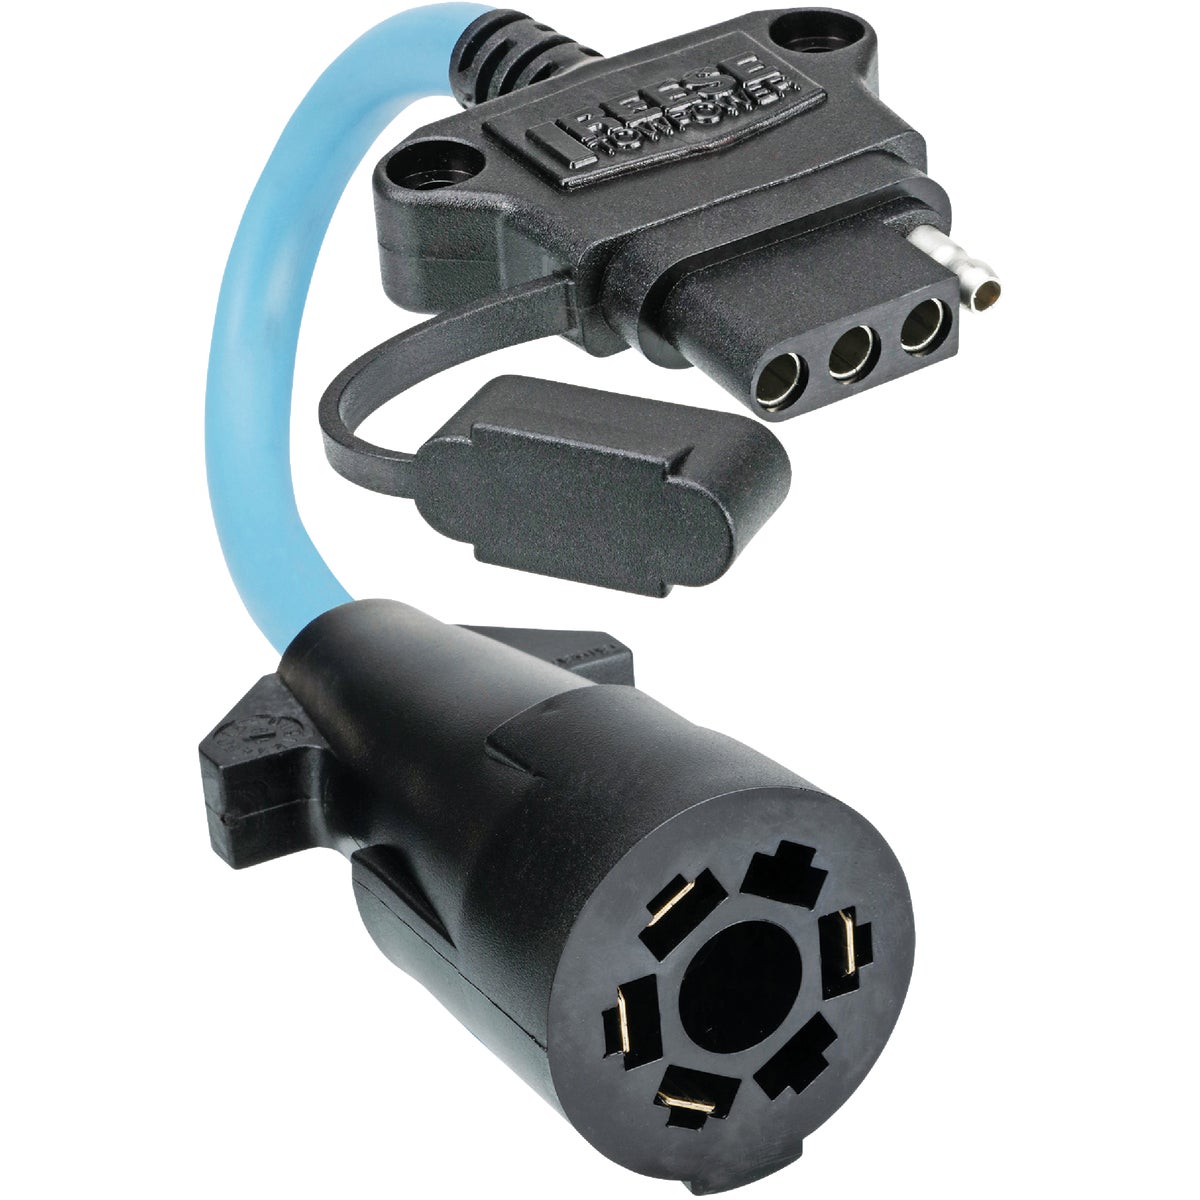 Item 570357, Quickly convert your 7-blade vehicle side connector to a 4-flat trailer end